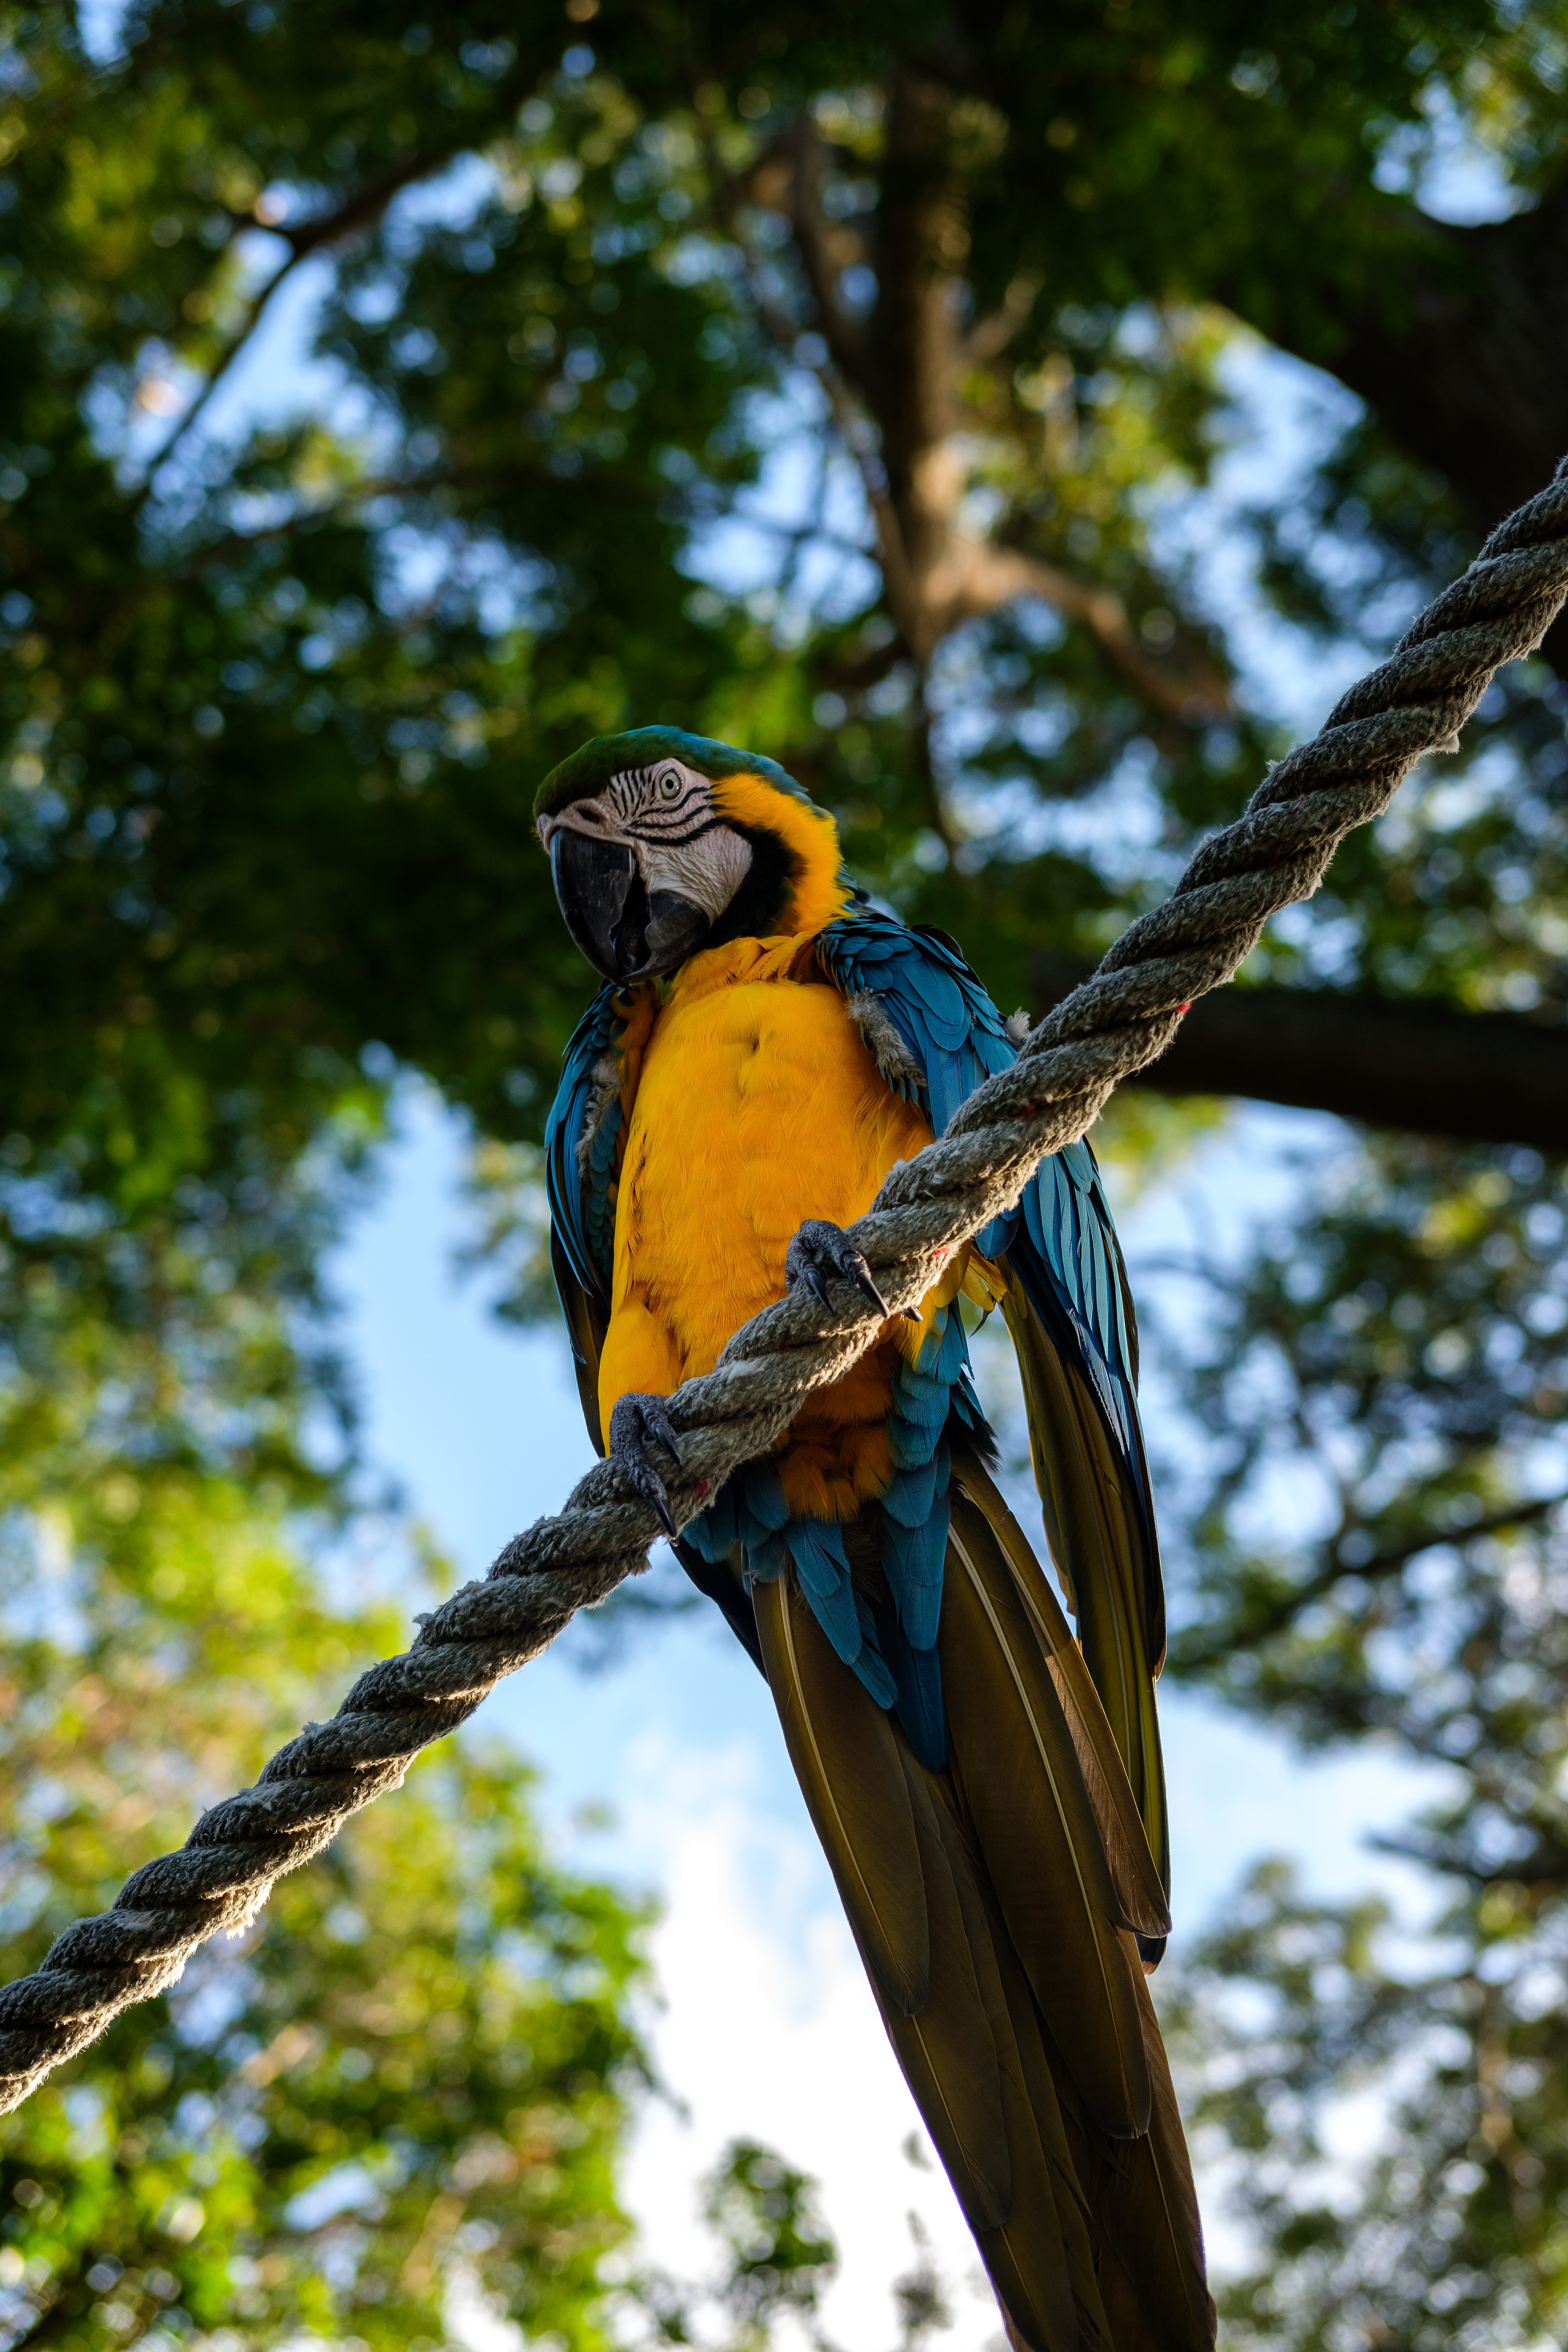 parrots, bird, animals, is sitting, sits, macaw, rope High Definition image